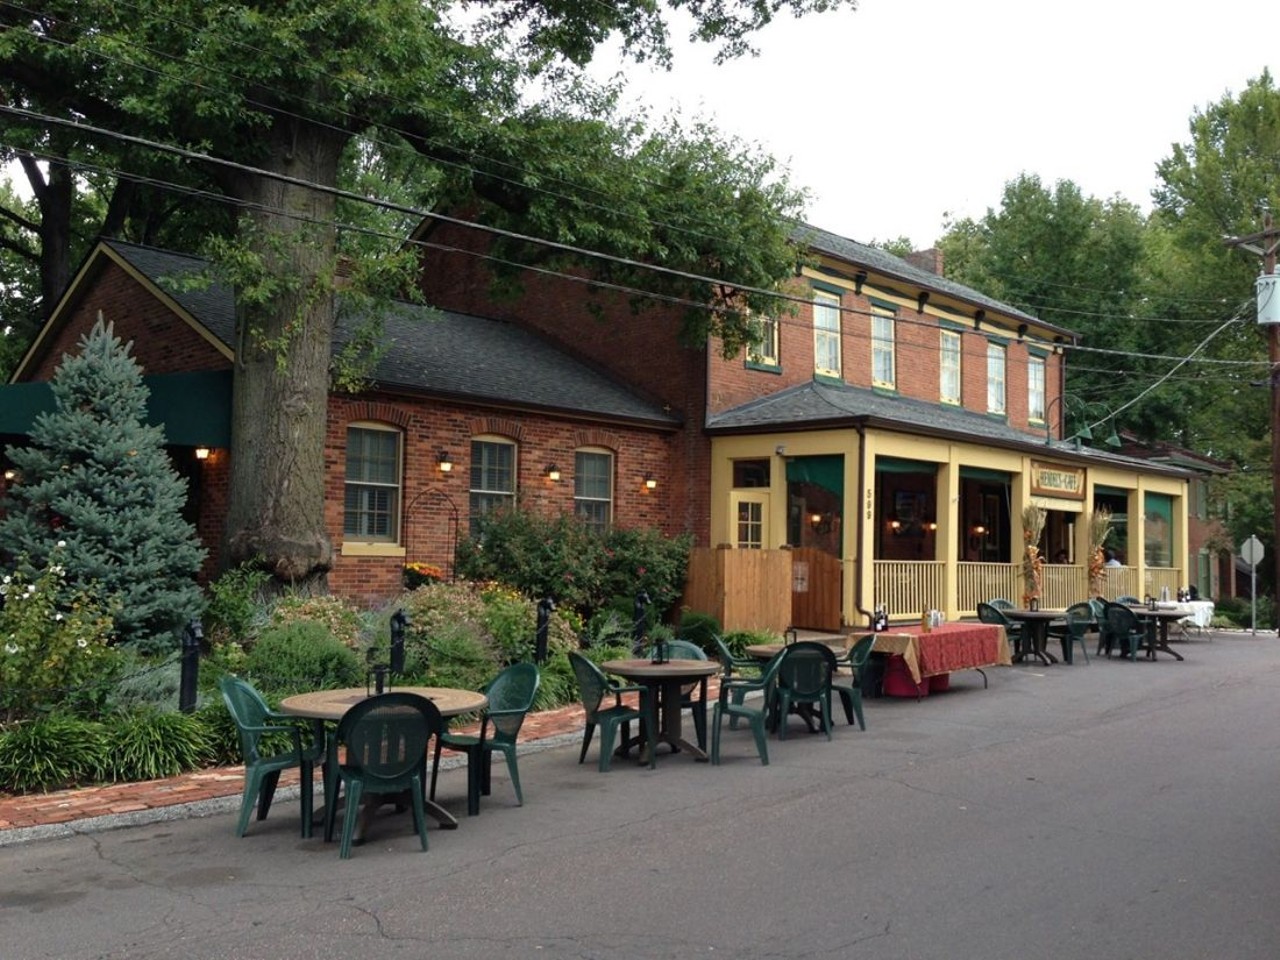 Hendel's Market Caf&eacute; & Piano Bar 
(559 St. Denis St.; 314-837-2304)
Located in an old general store that was founded after the close of the Civil War, Hendel's Market Cafe has all of the charm you'd expect from Florissant's historic district. This quaint, tree-lined patio is like a cozy getaway, unquestionably the best place in north county for enjoying an outdoor meal or a glass of wine.
Photo courtesy of the Riverfront Times